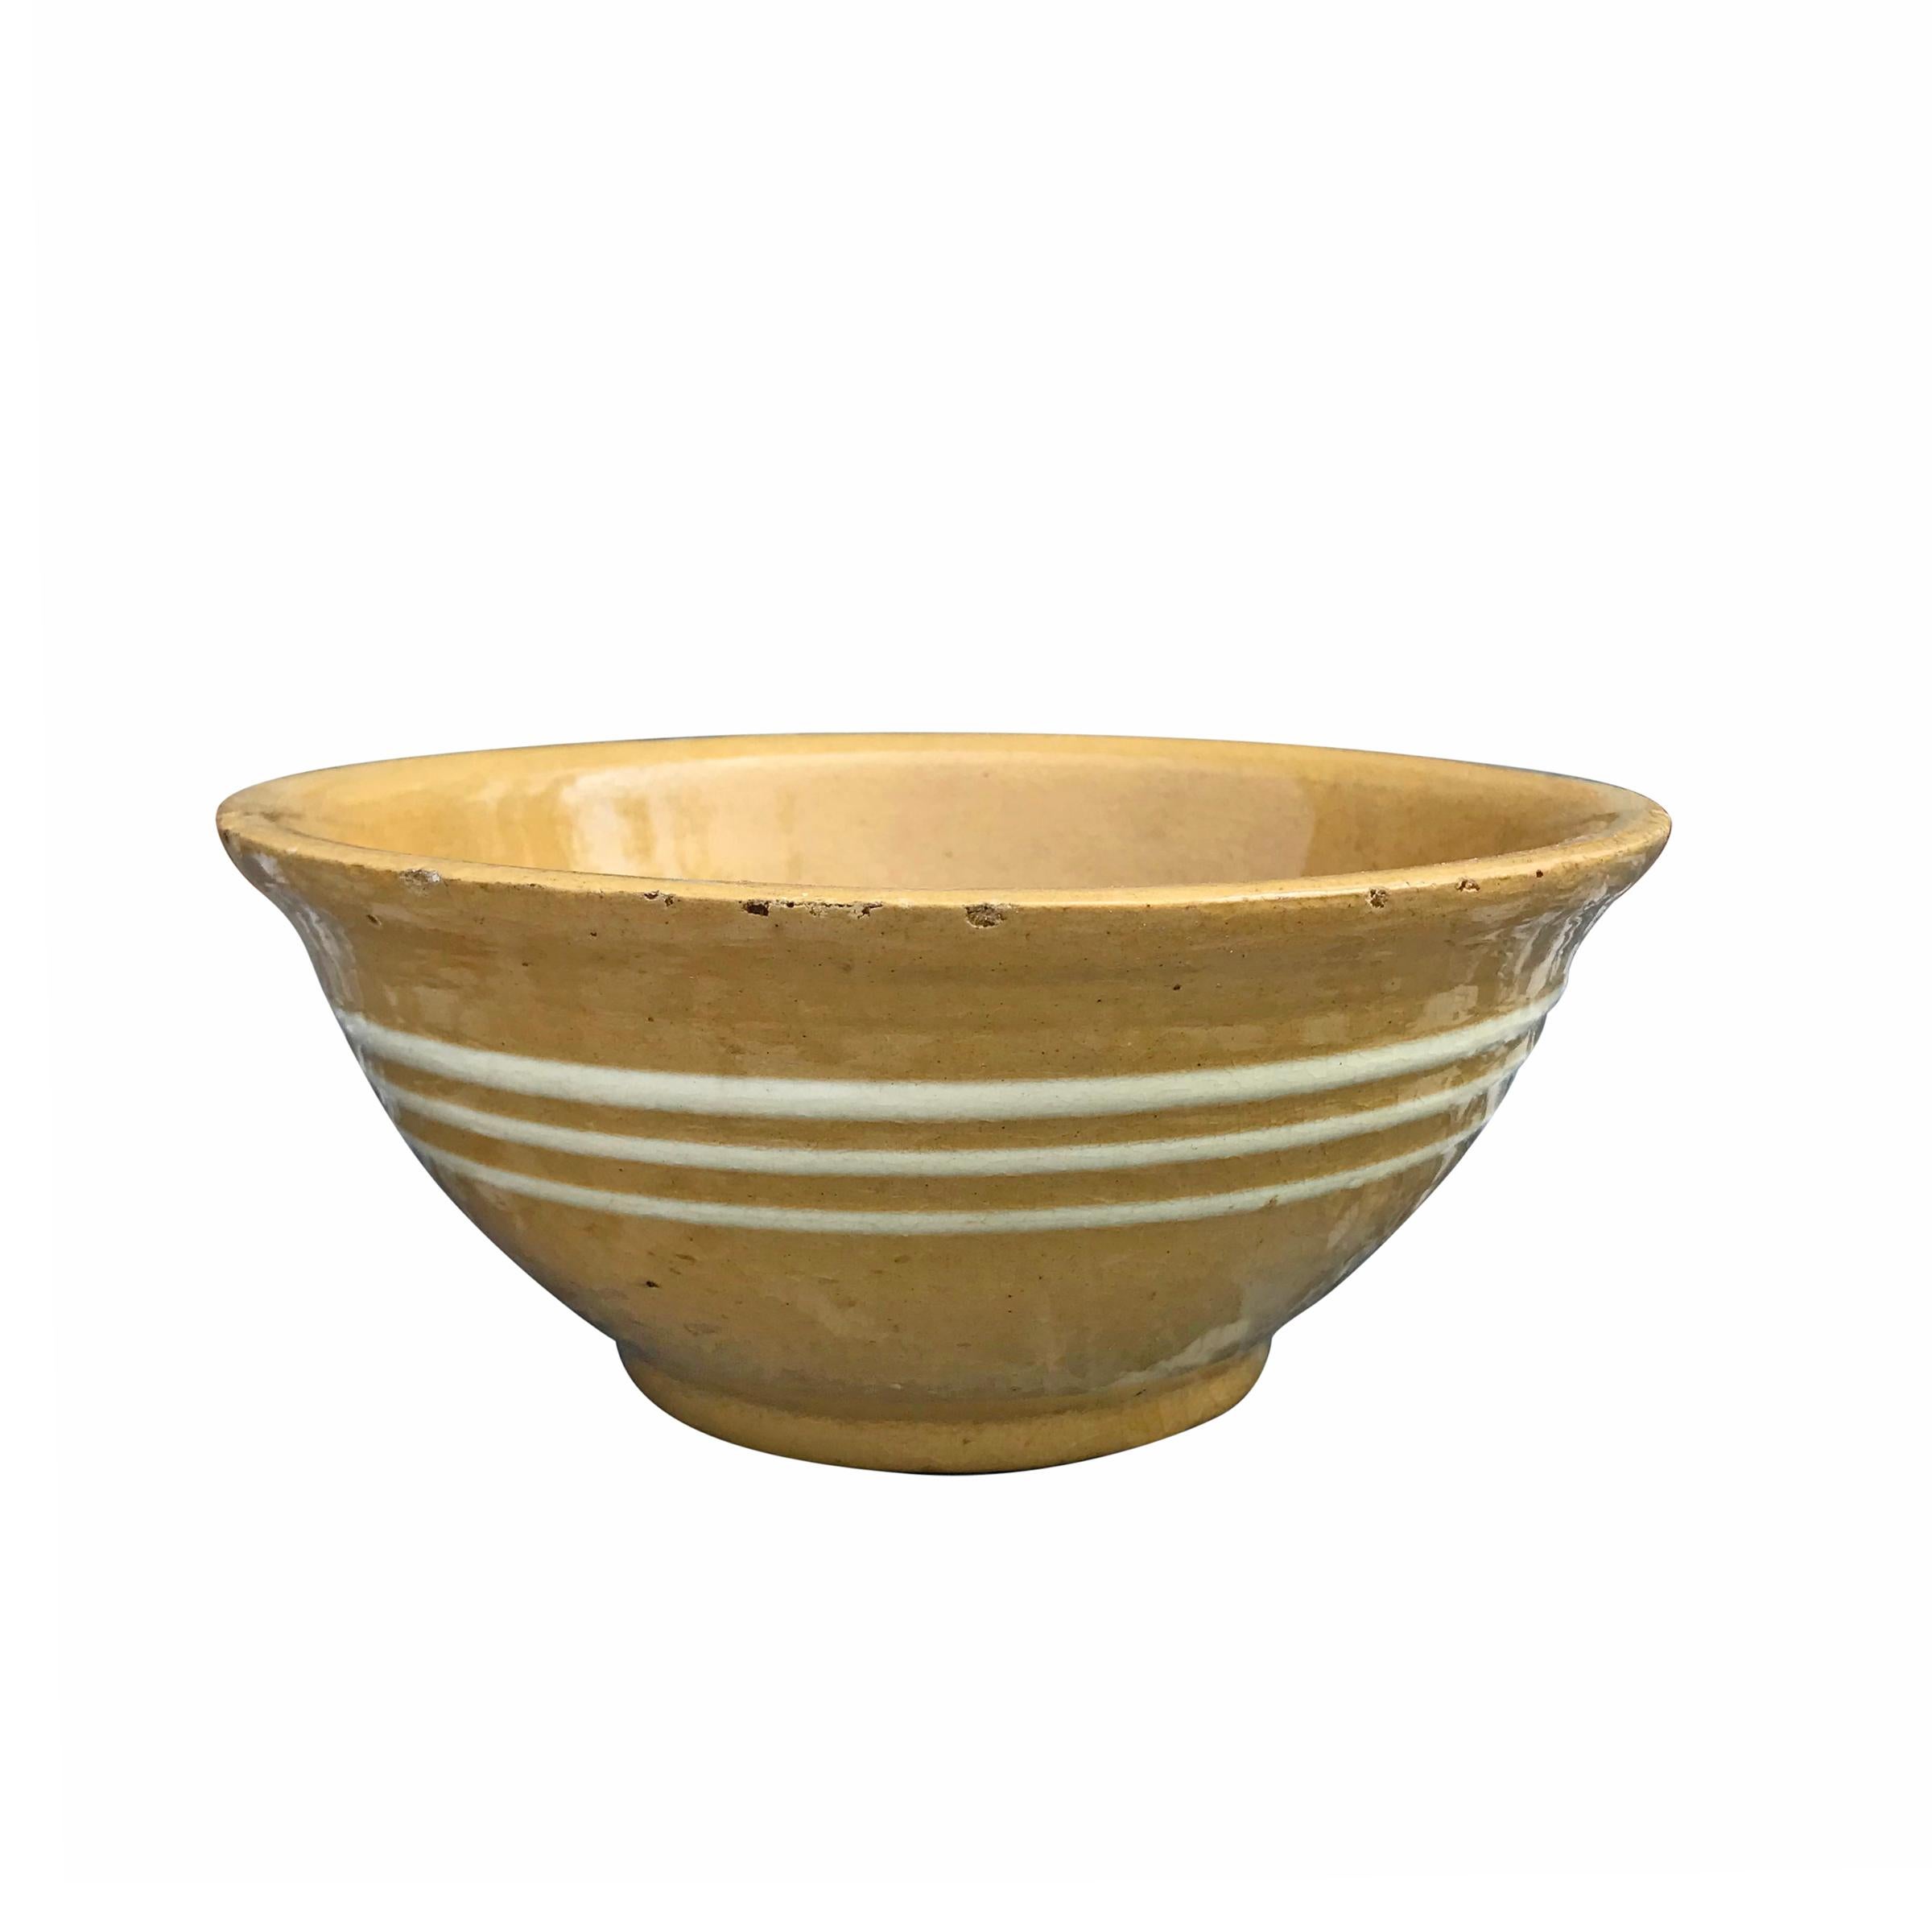 American Set of Three Late 19th Century Yellow Ware Mixing Bowls